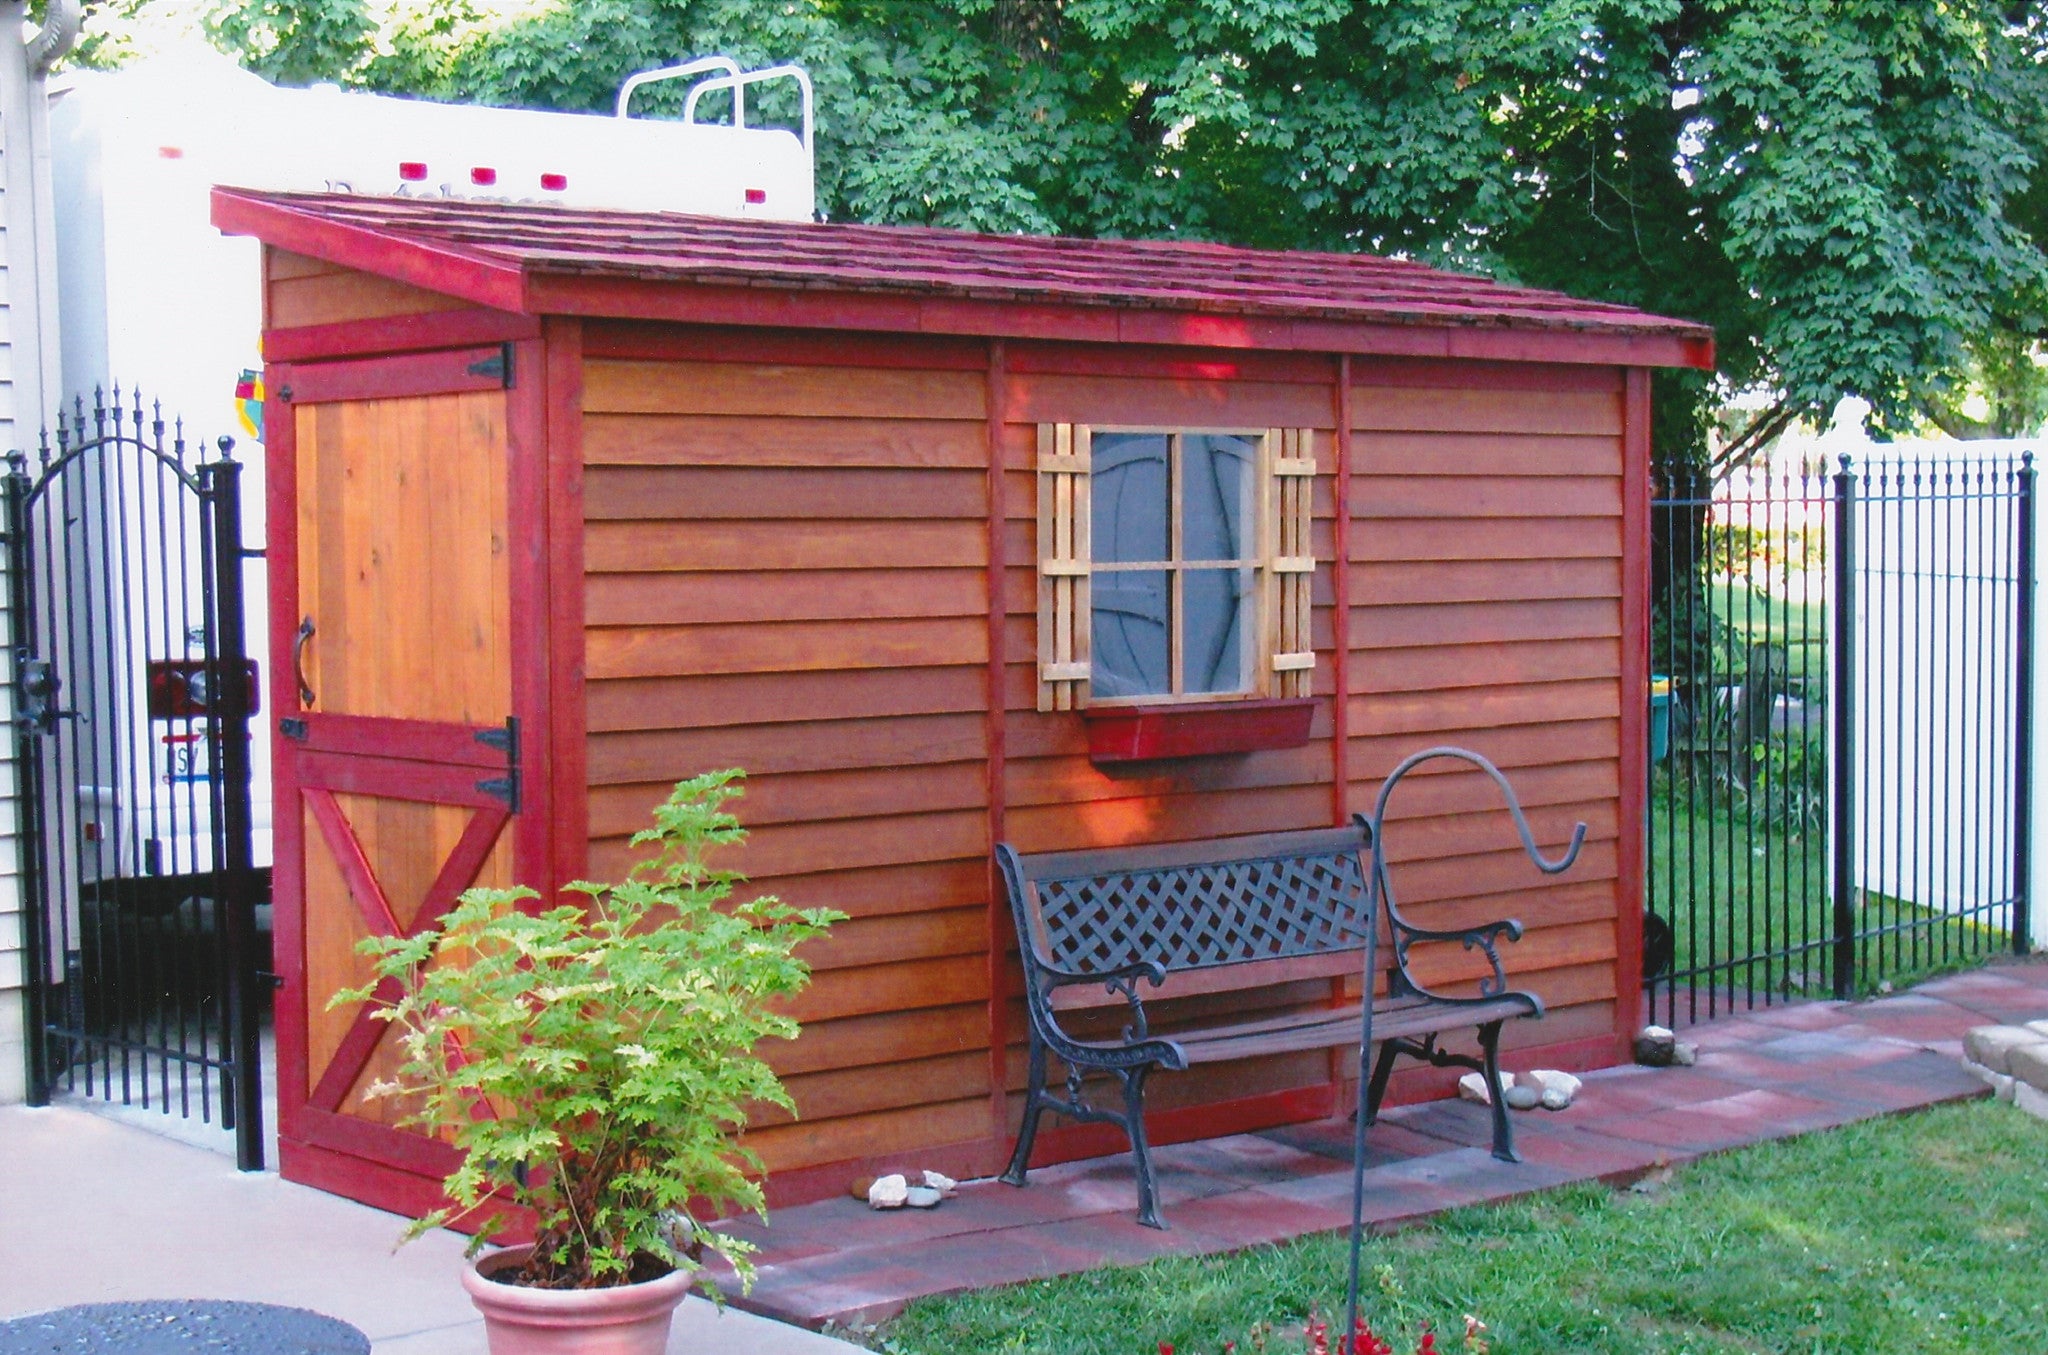 Yard Storage Sheds, 8 x 4 Shed, DIY Lean to Style Plans 